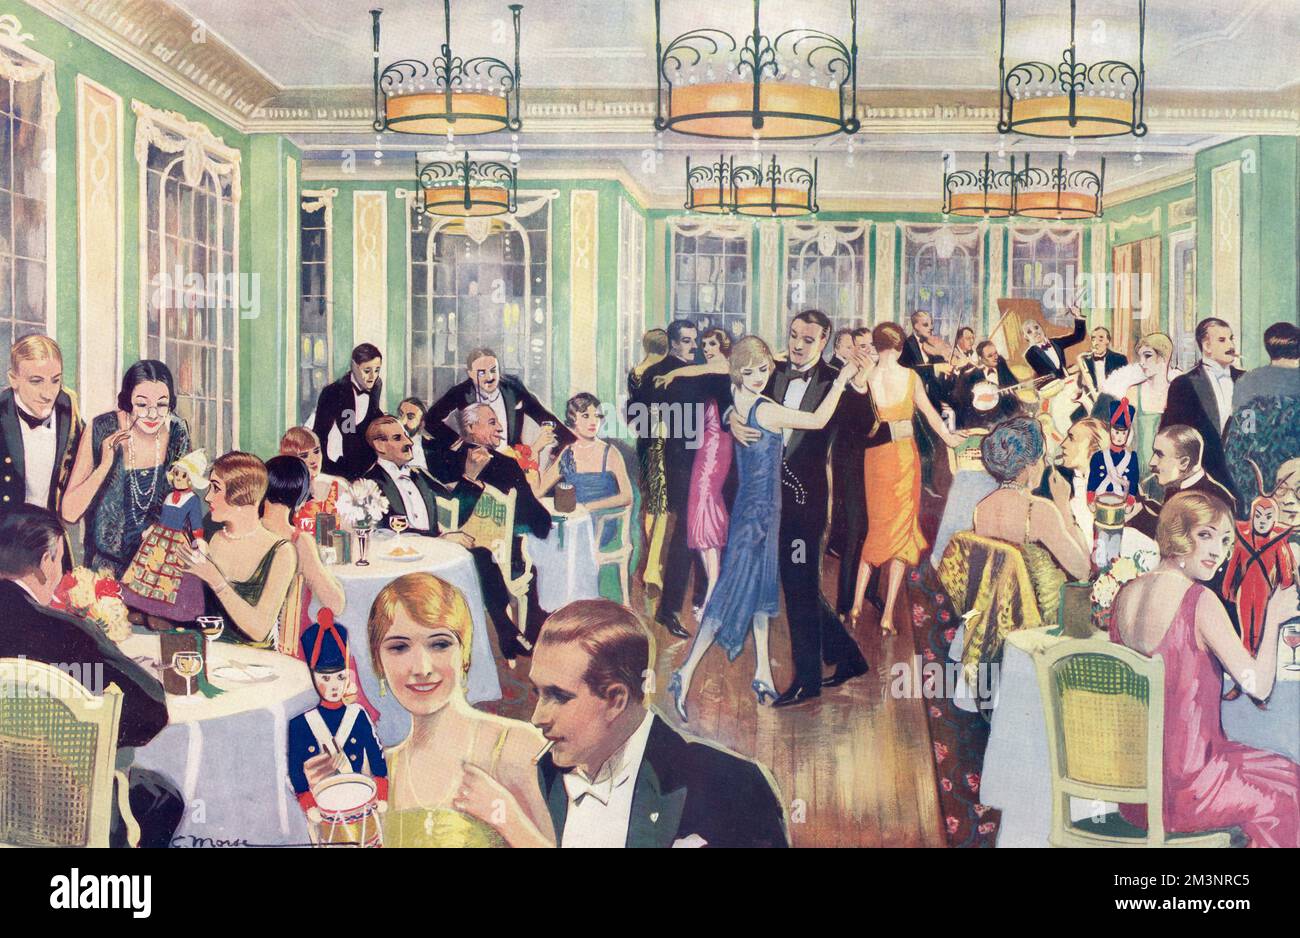 A colourful evening at iconic Soho restaurant, Kettners, in the heart of London with couples dancing to live music and society mingling among the tables.     Date: 1926 Stock Photo